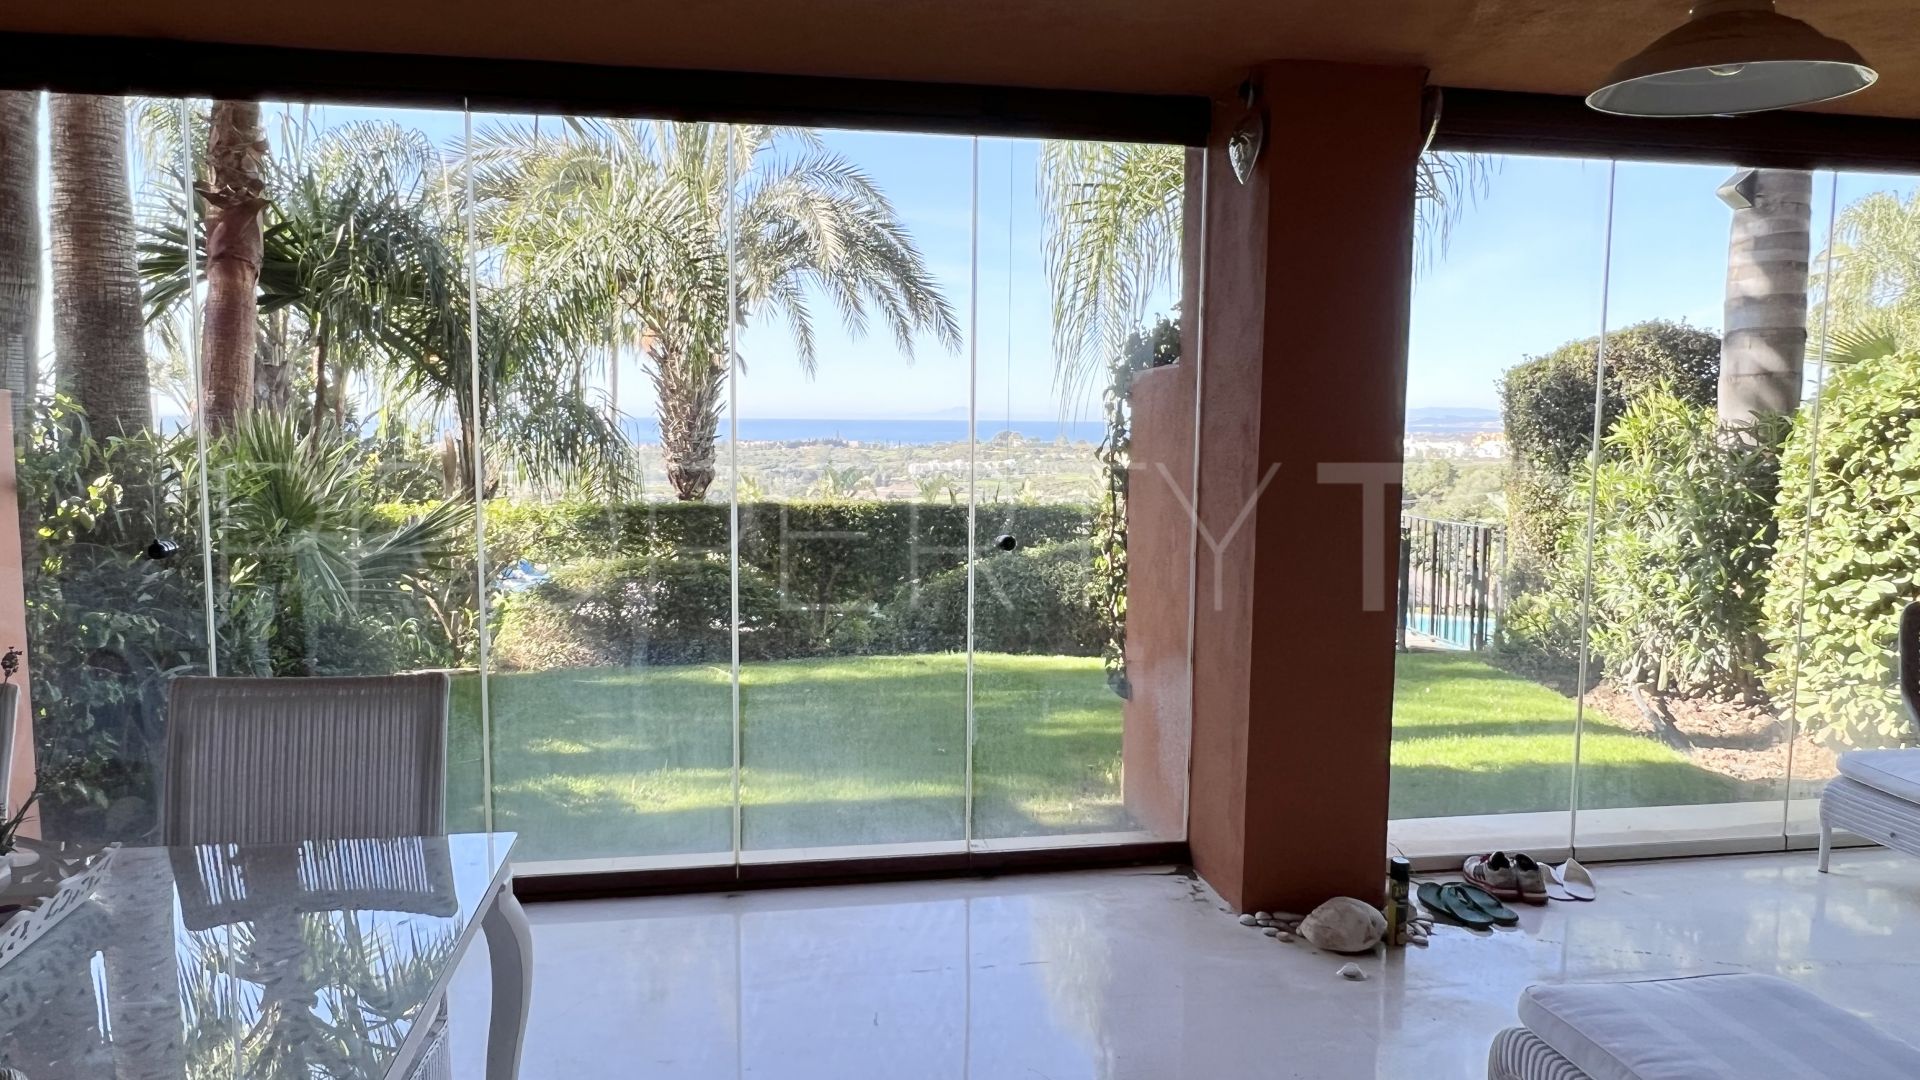 For sale ground floor apartment with 2 bedrooms in Los Flamingos